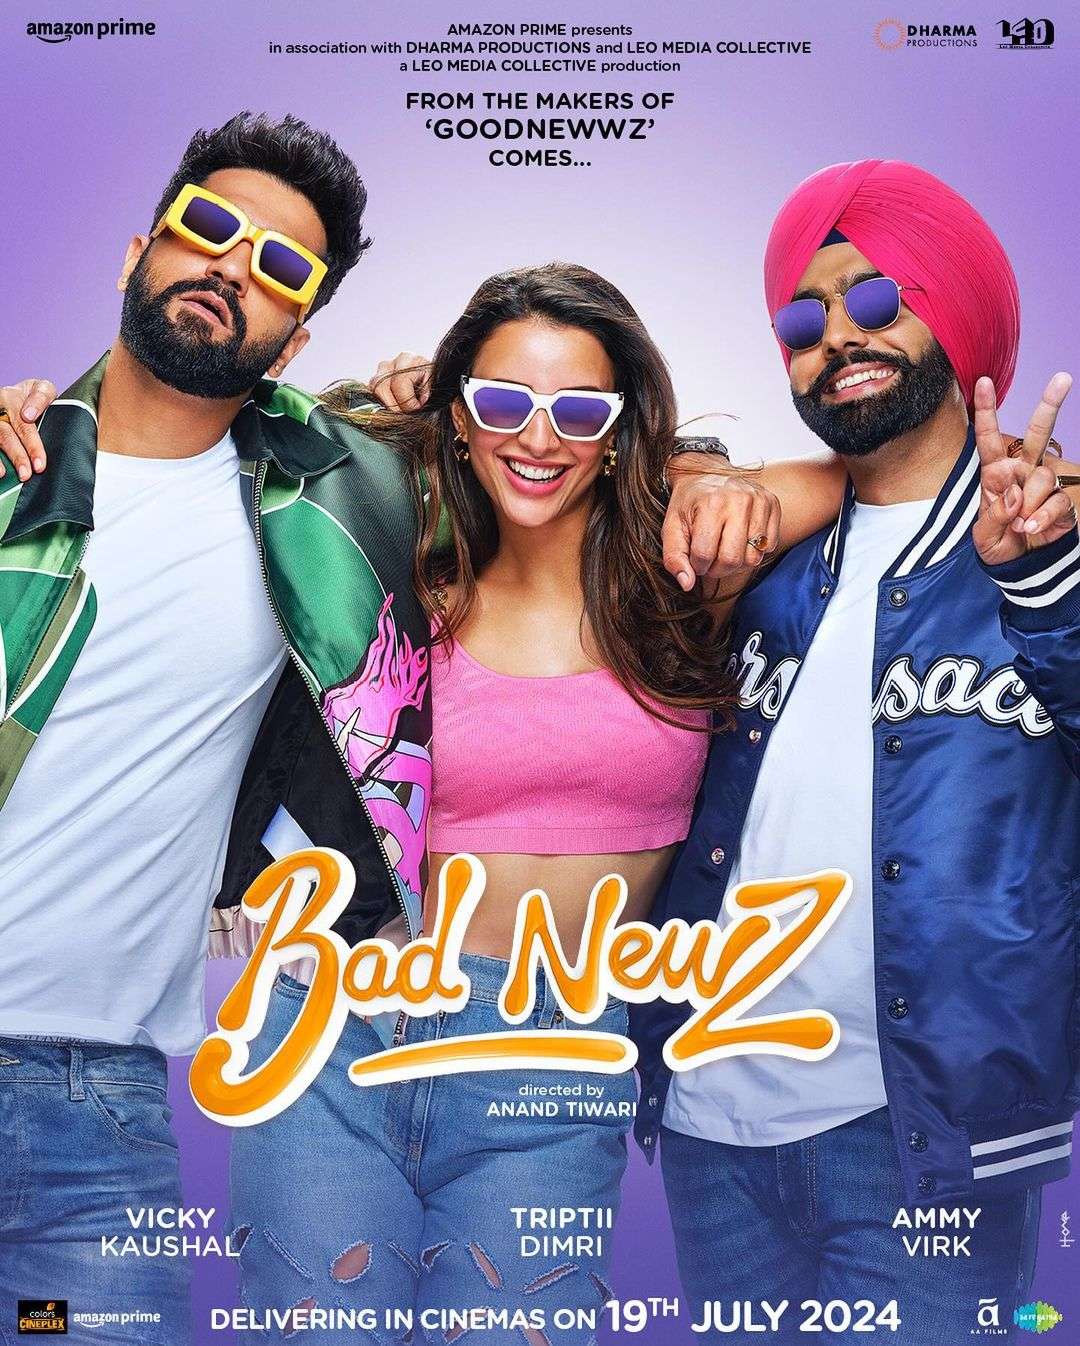 Tripti dimri vicky kaushal movie bad newz release date first poster revealed